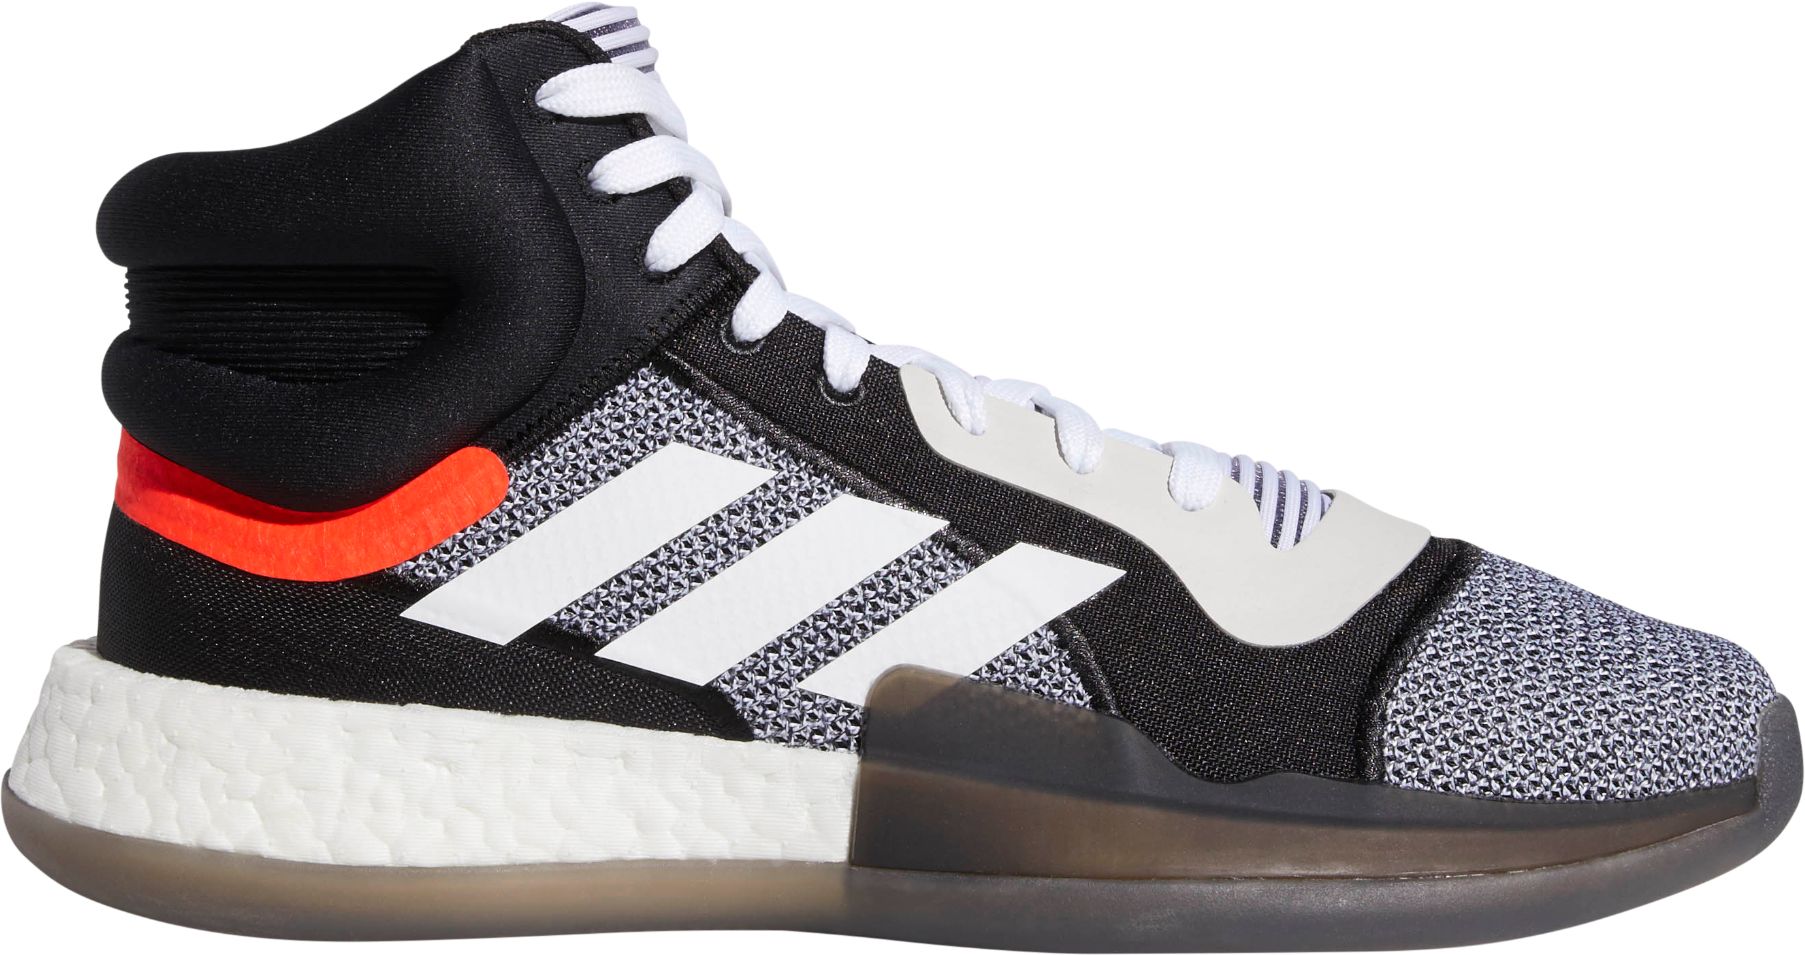 adidas Marquee BOOST Basketball Shoes - .97